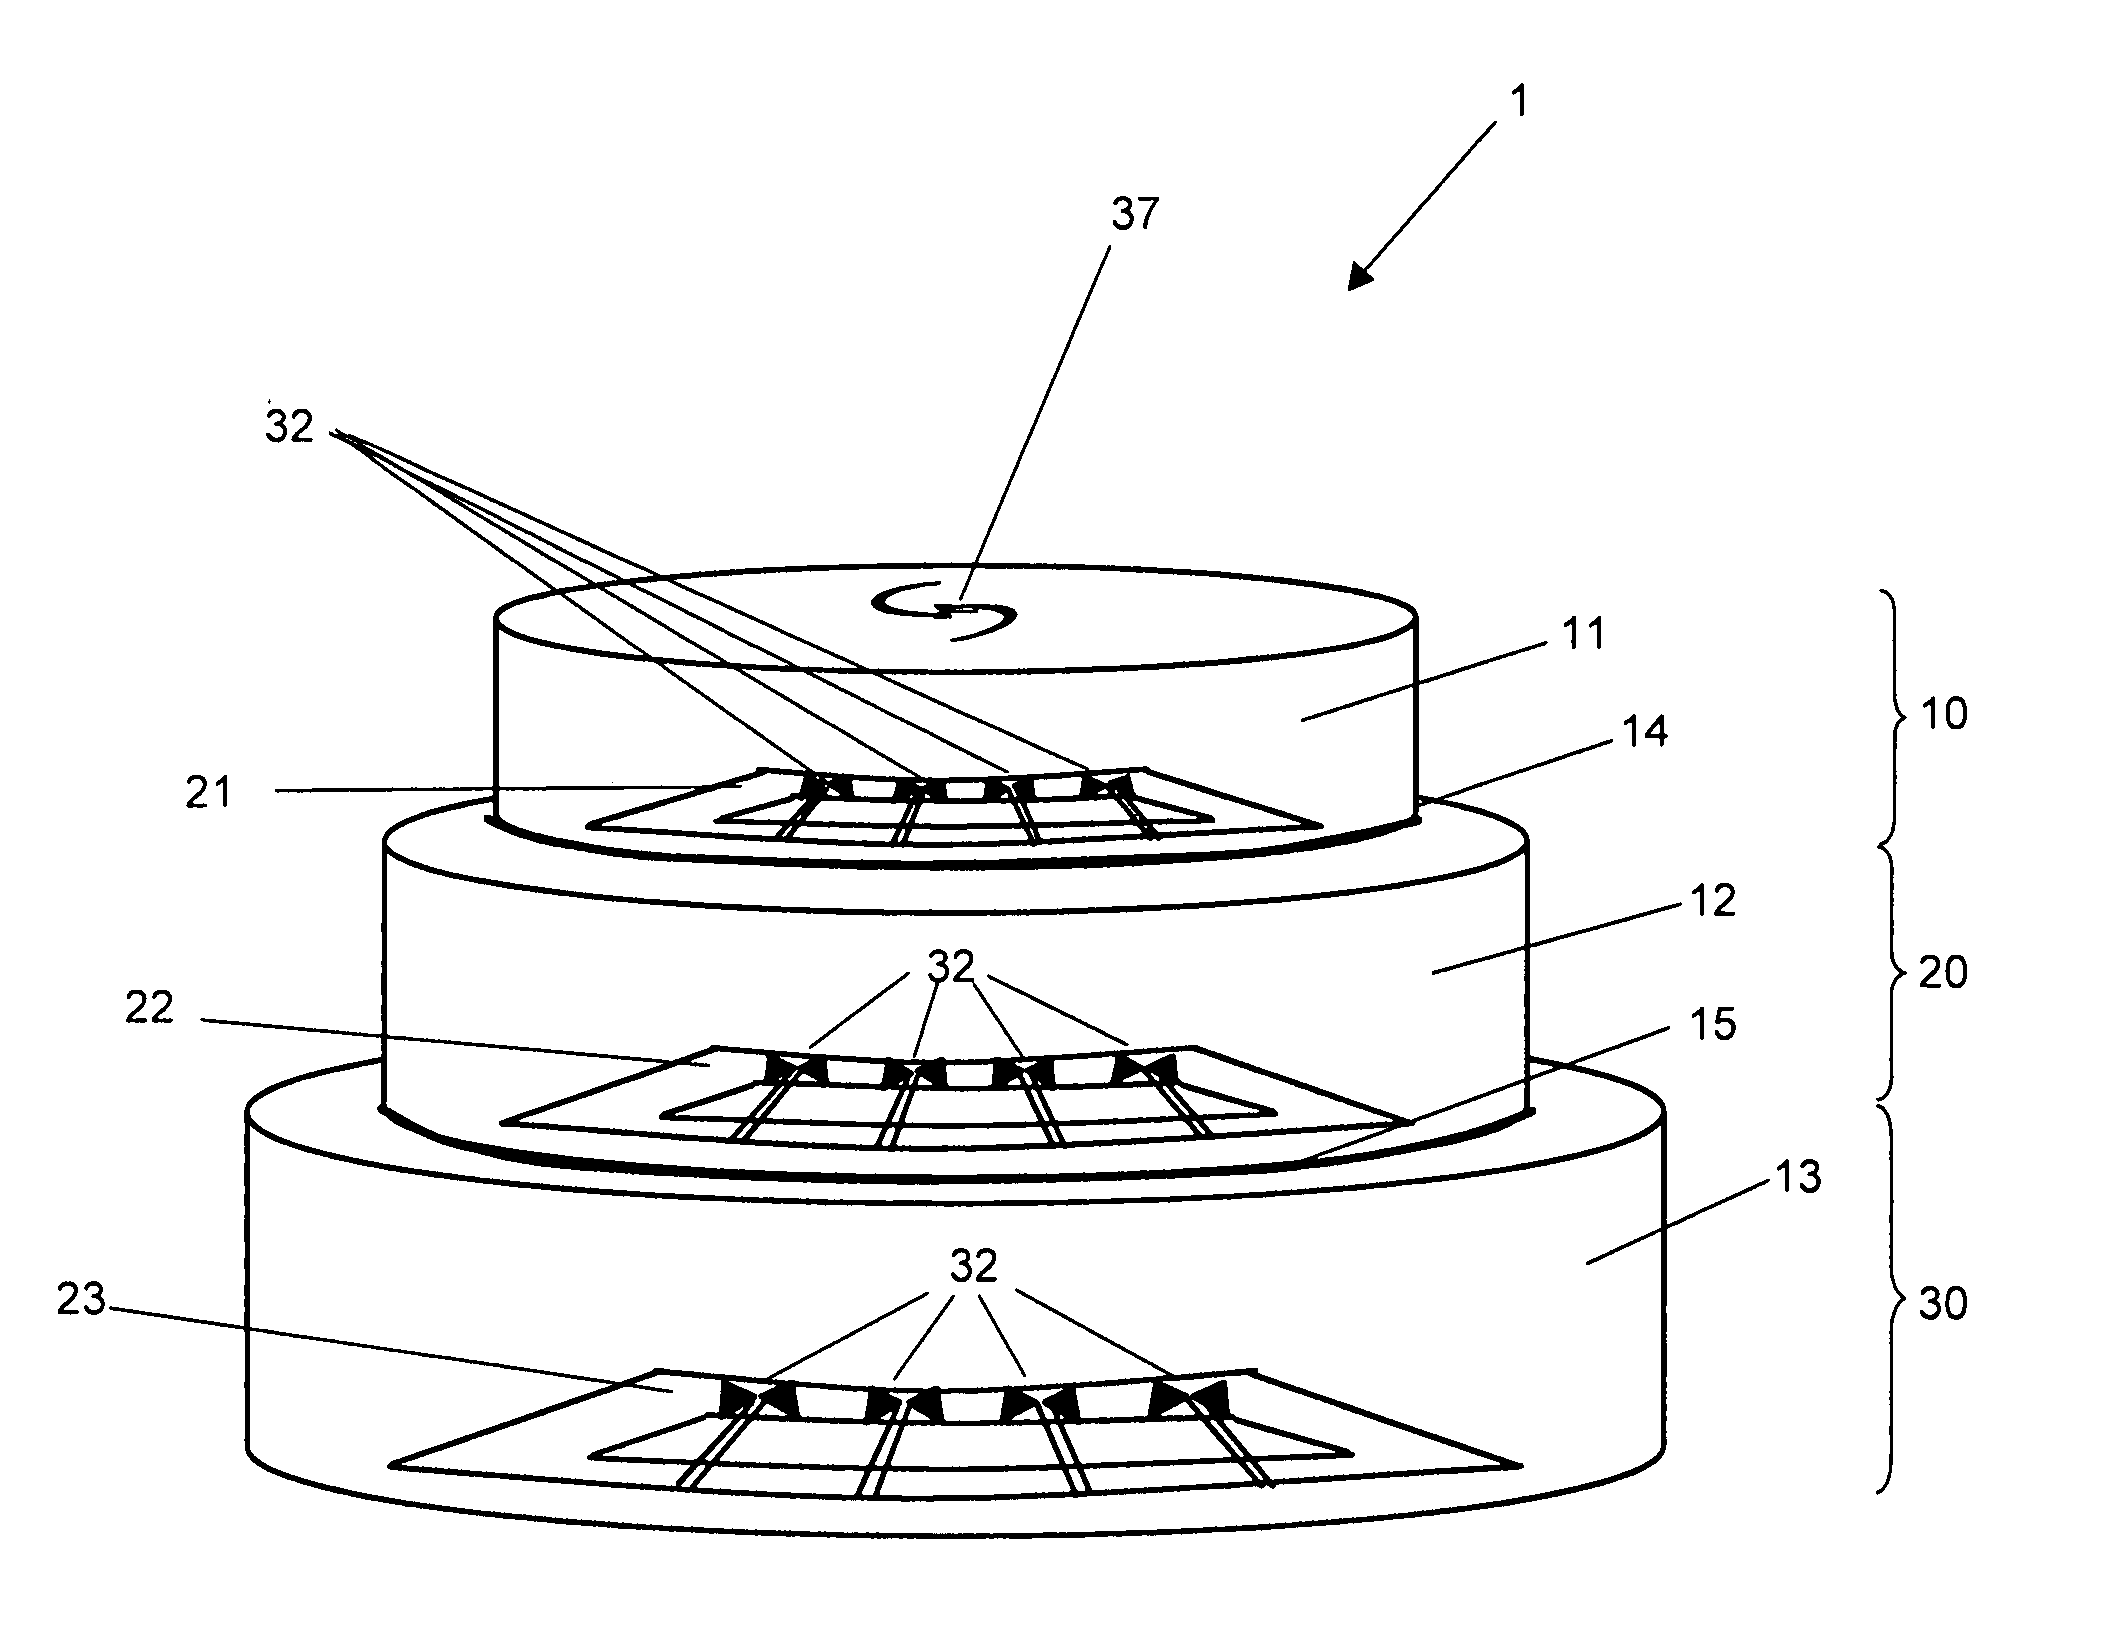 Antenna operable across multiple frequencies while maintaining substantially uniform beam shape